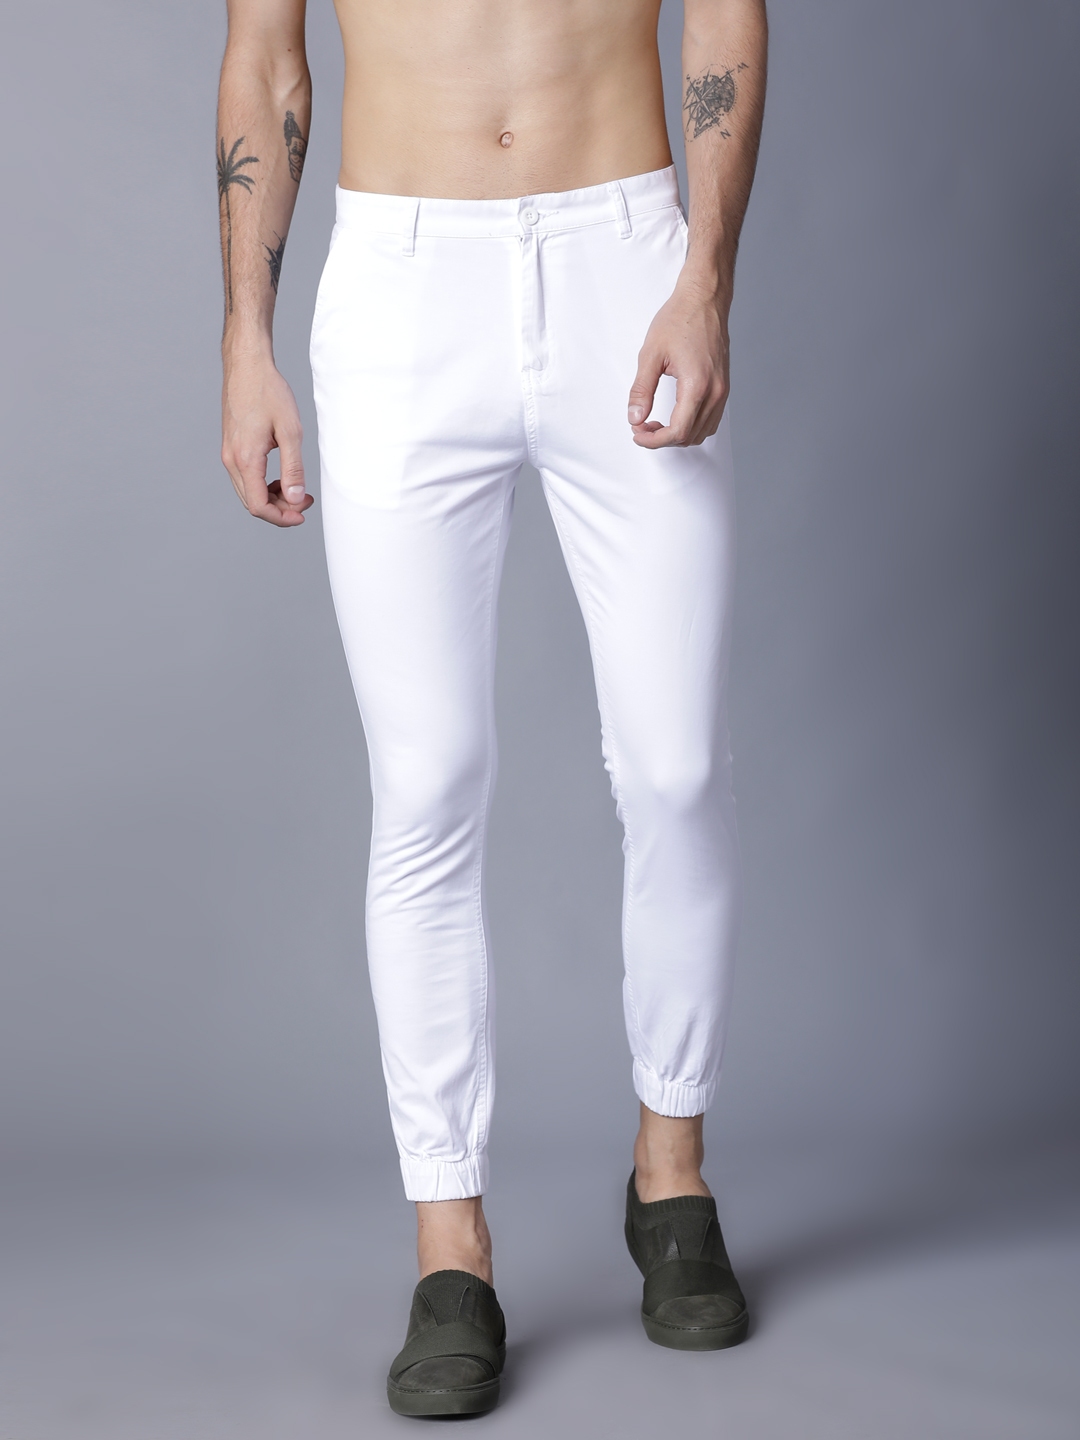 Buy HIGHLANDER By Rohit Sharma Men White Slim Fit Joggers - Trousers ...